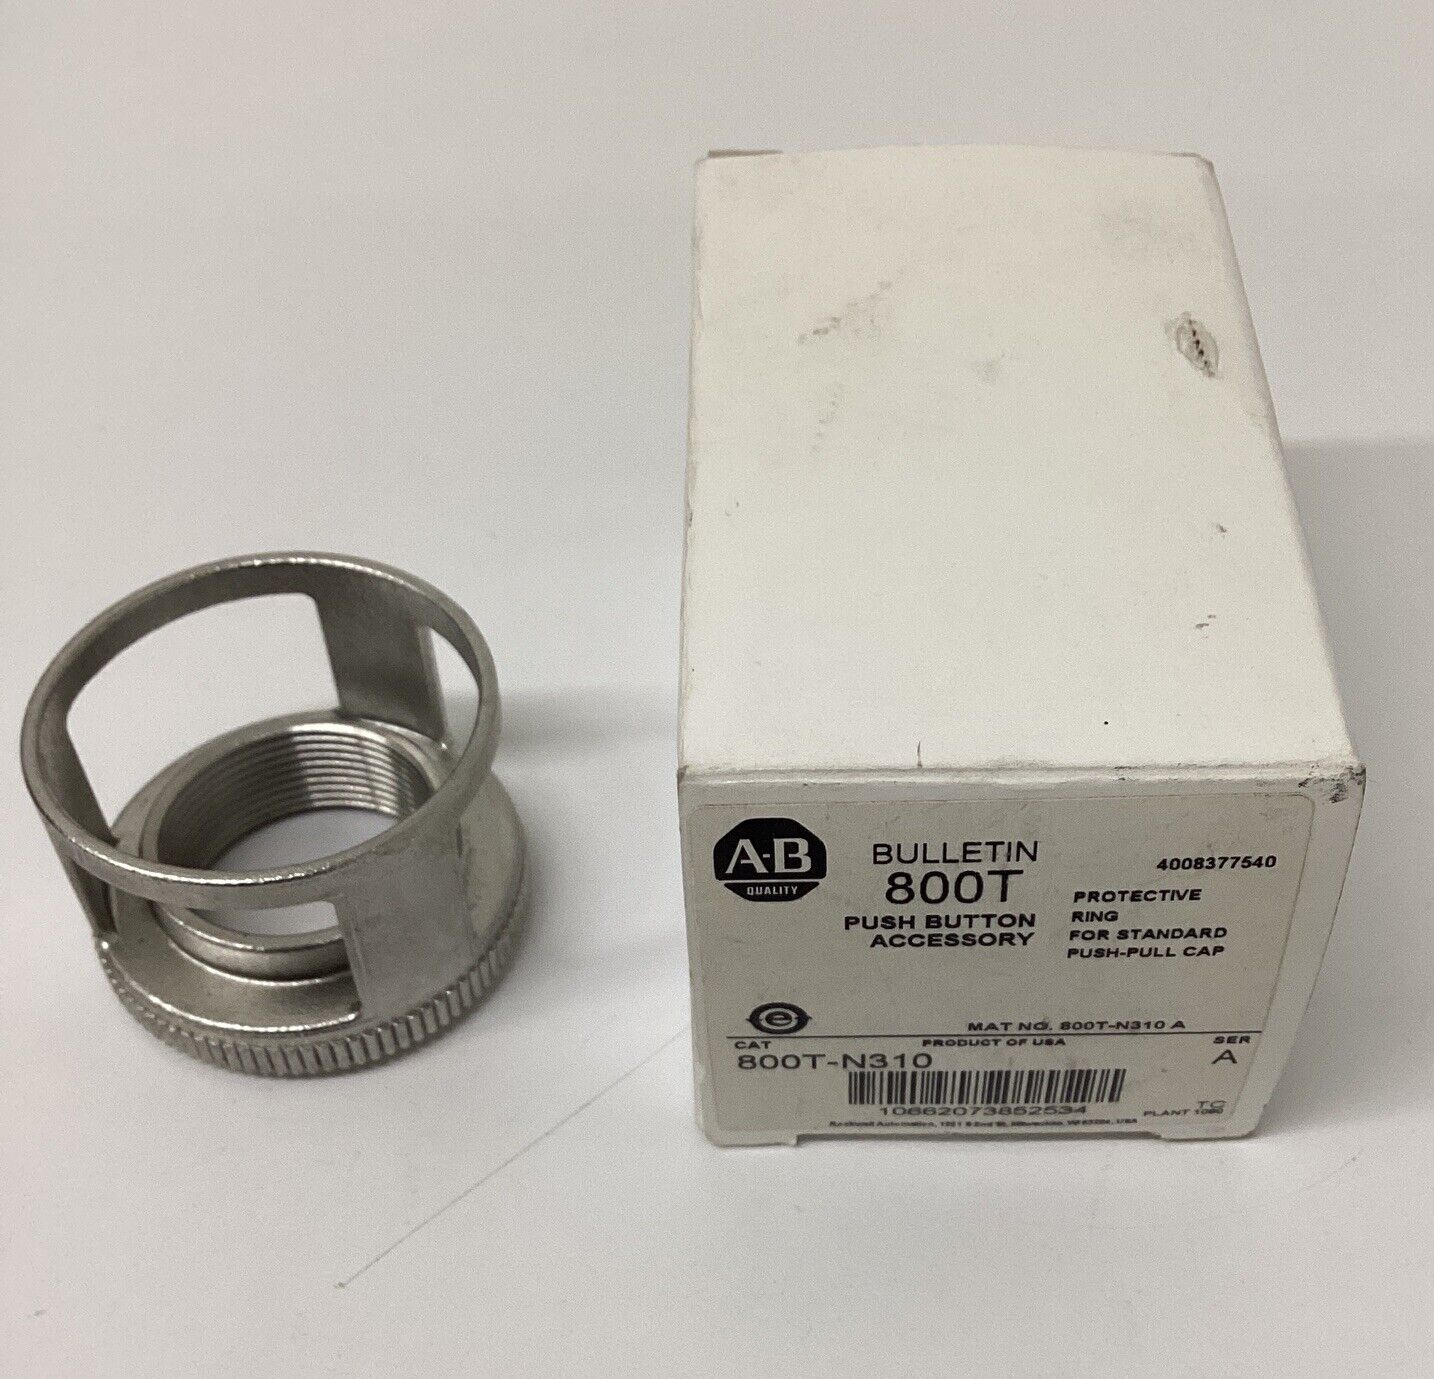 Allen Bradley 800T-N310 Protective Ring for Standard Push Button Pull Cap BL126